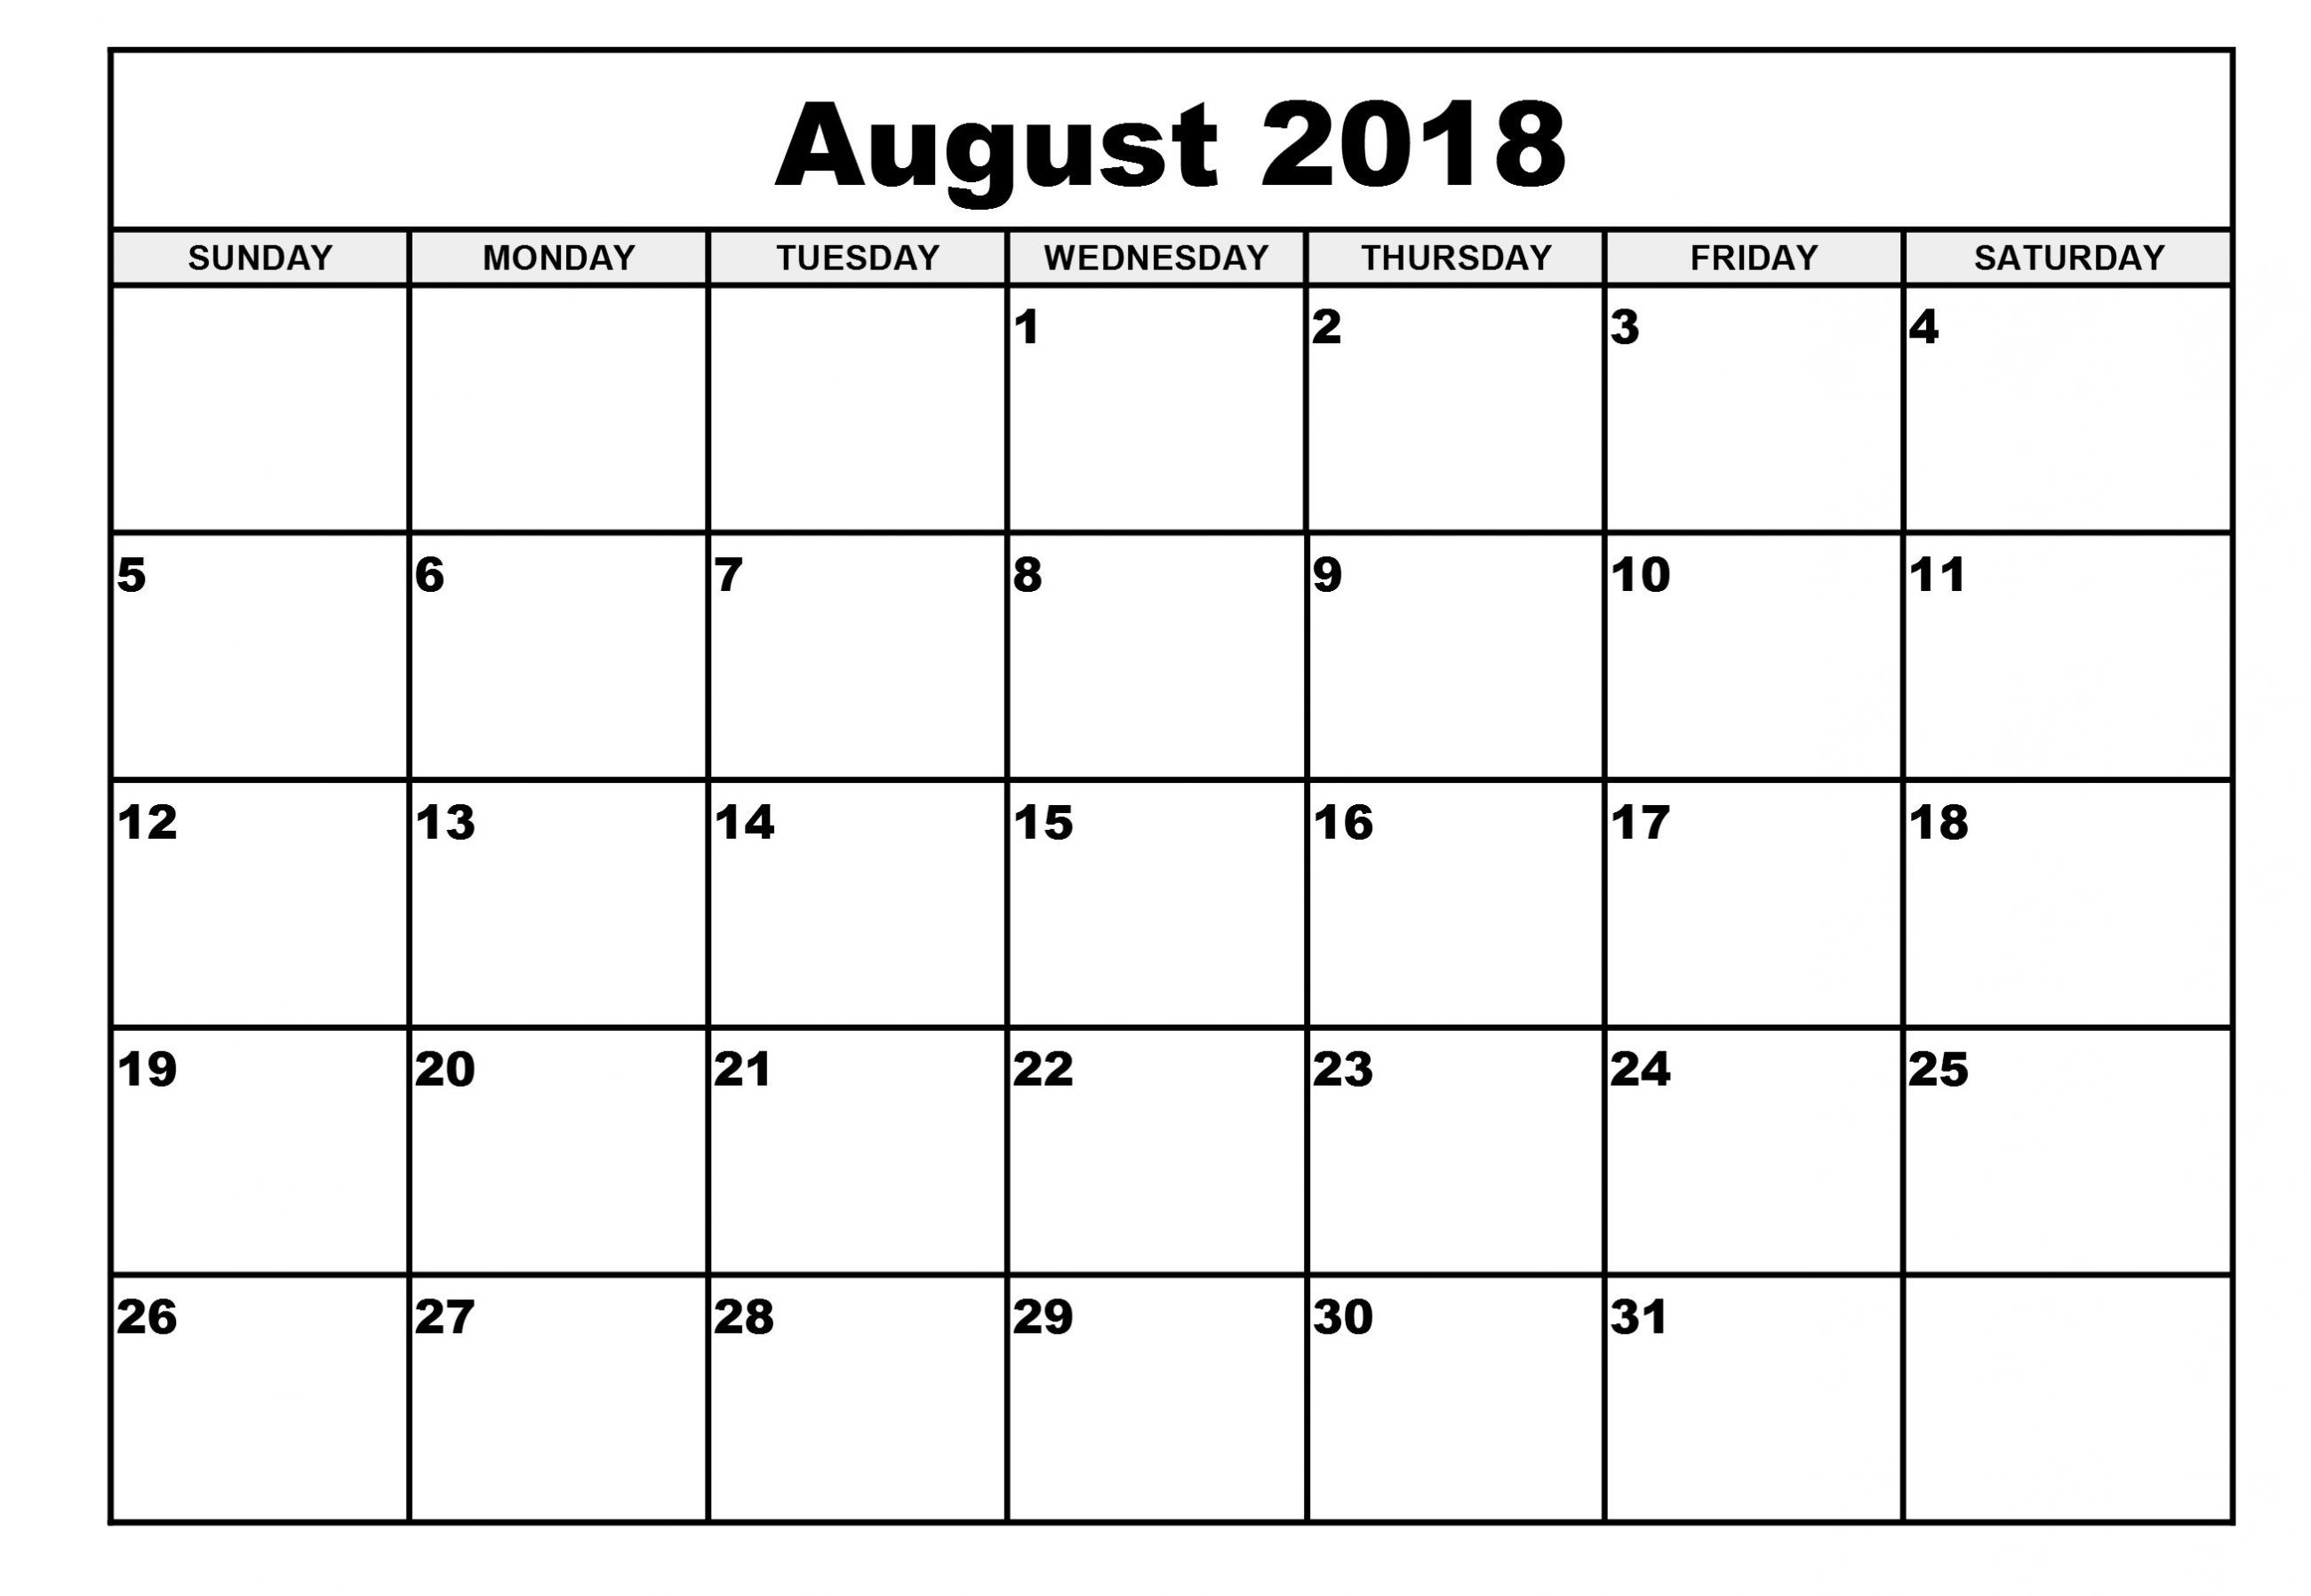 Pin4Khd On August Month Calendar 2018 | Monthly Calendar 2018 throughout August Printable Calendar By Month